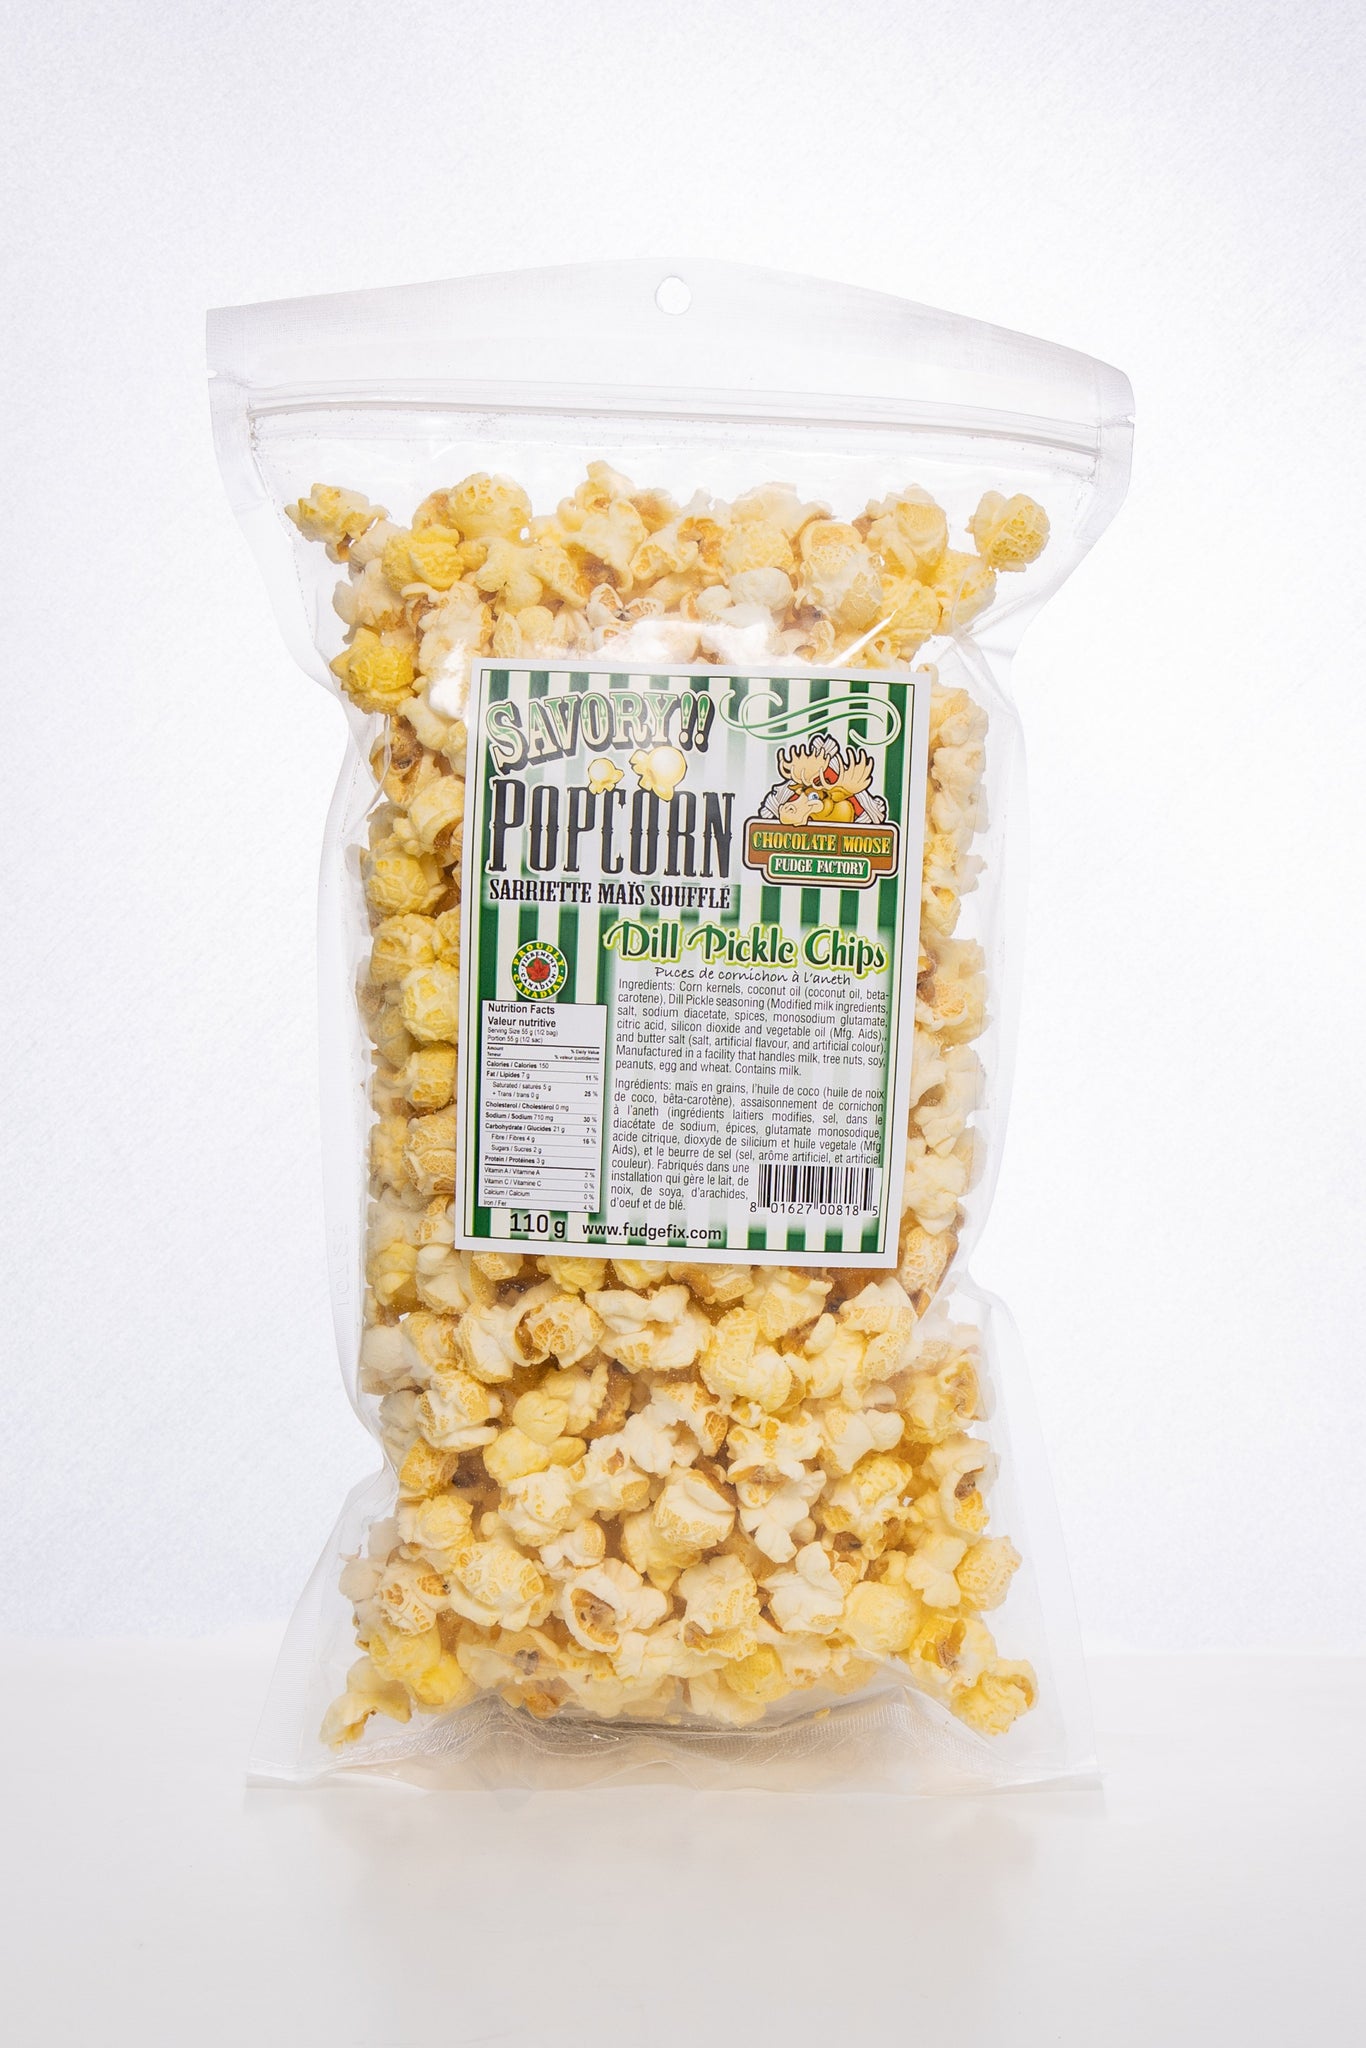 Dill Pickle Chips - Savory Popcorn